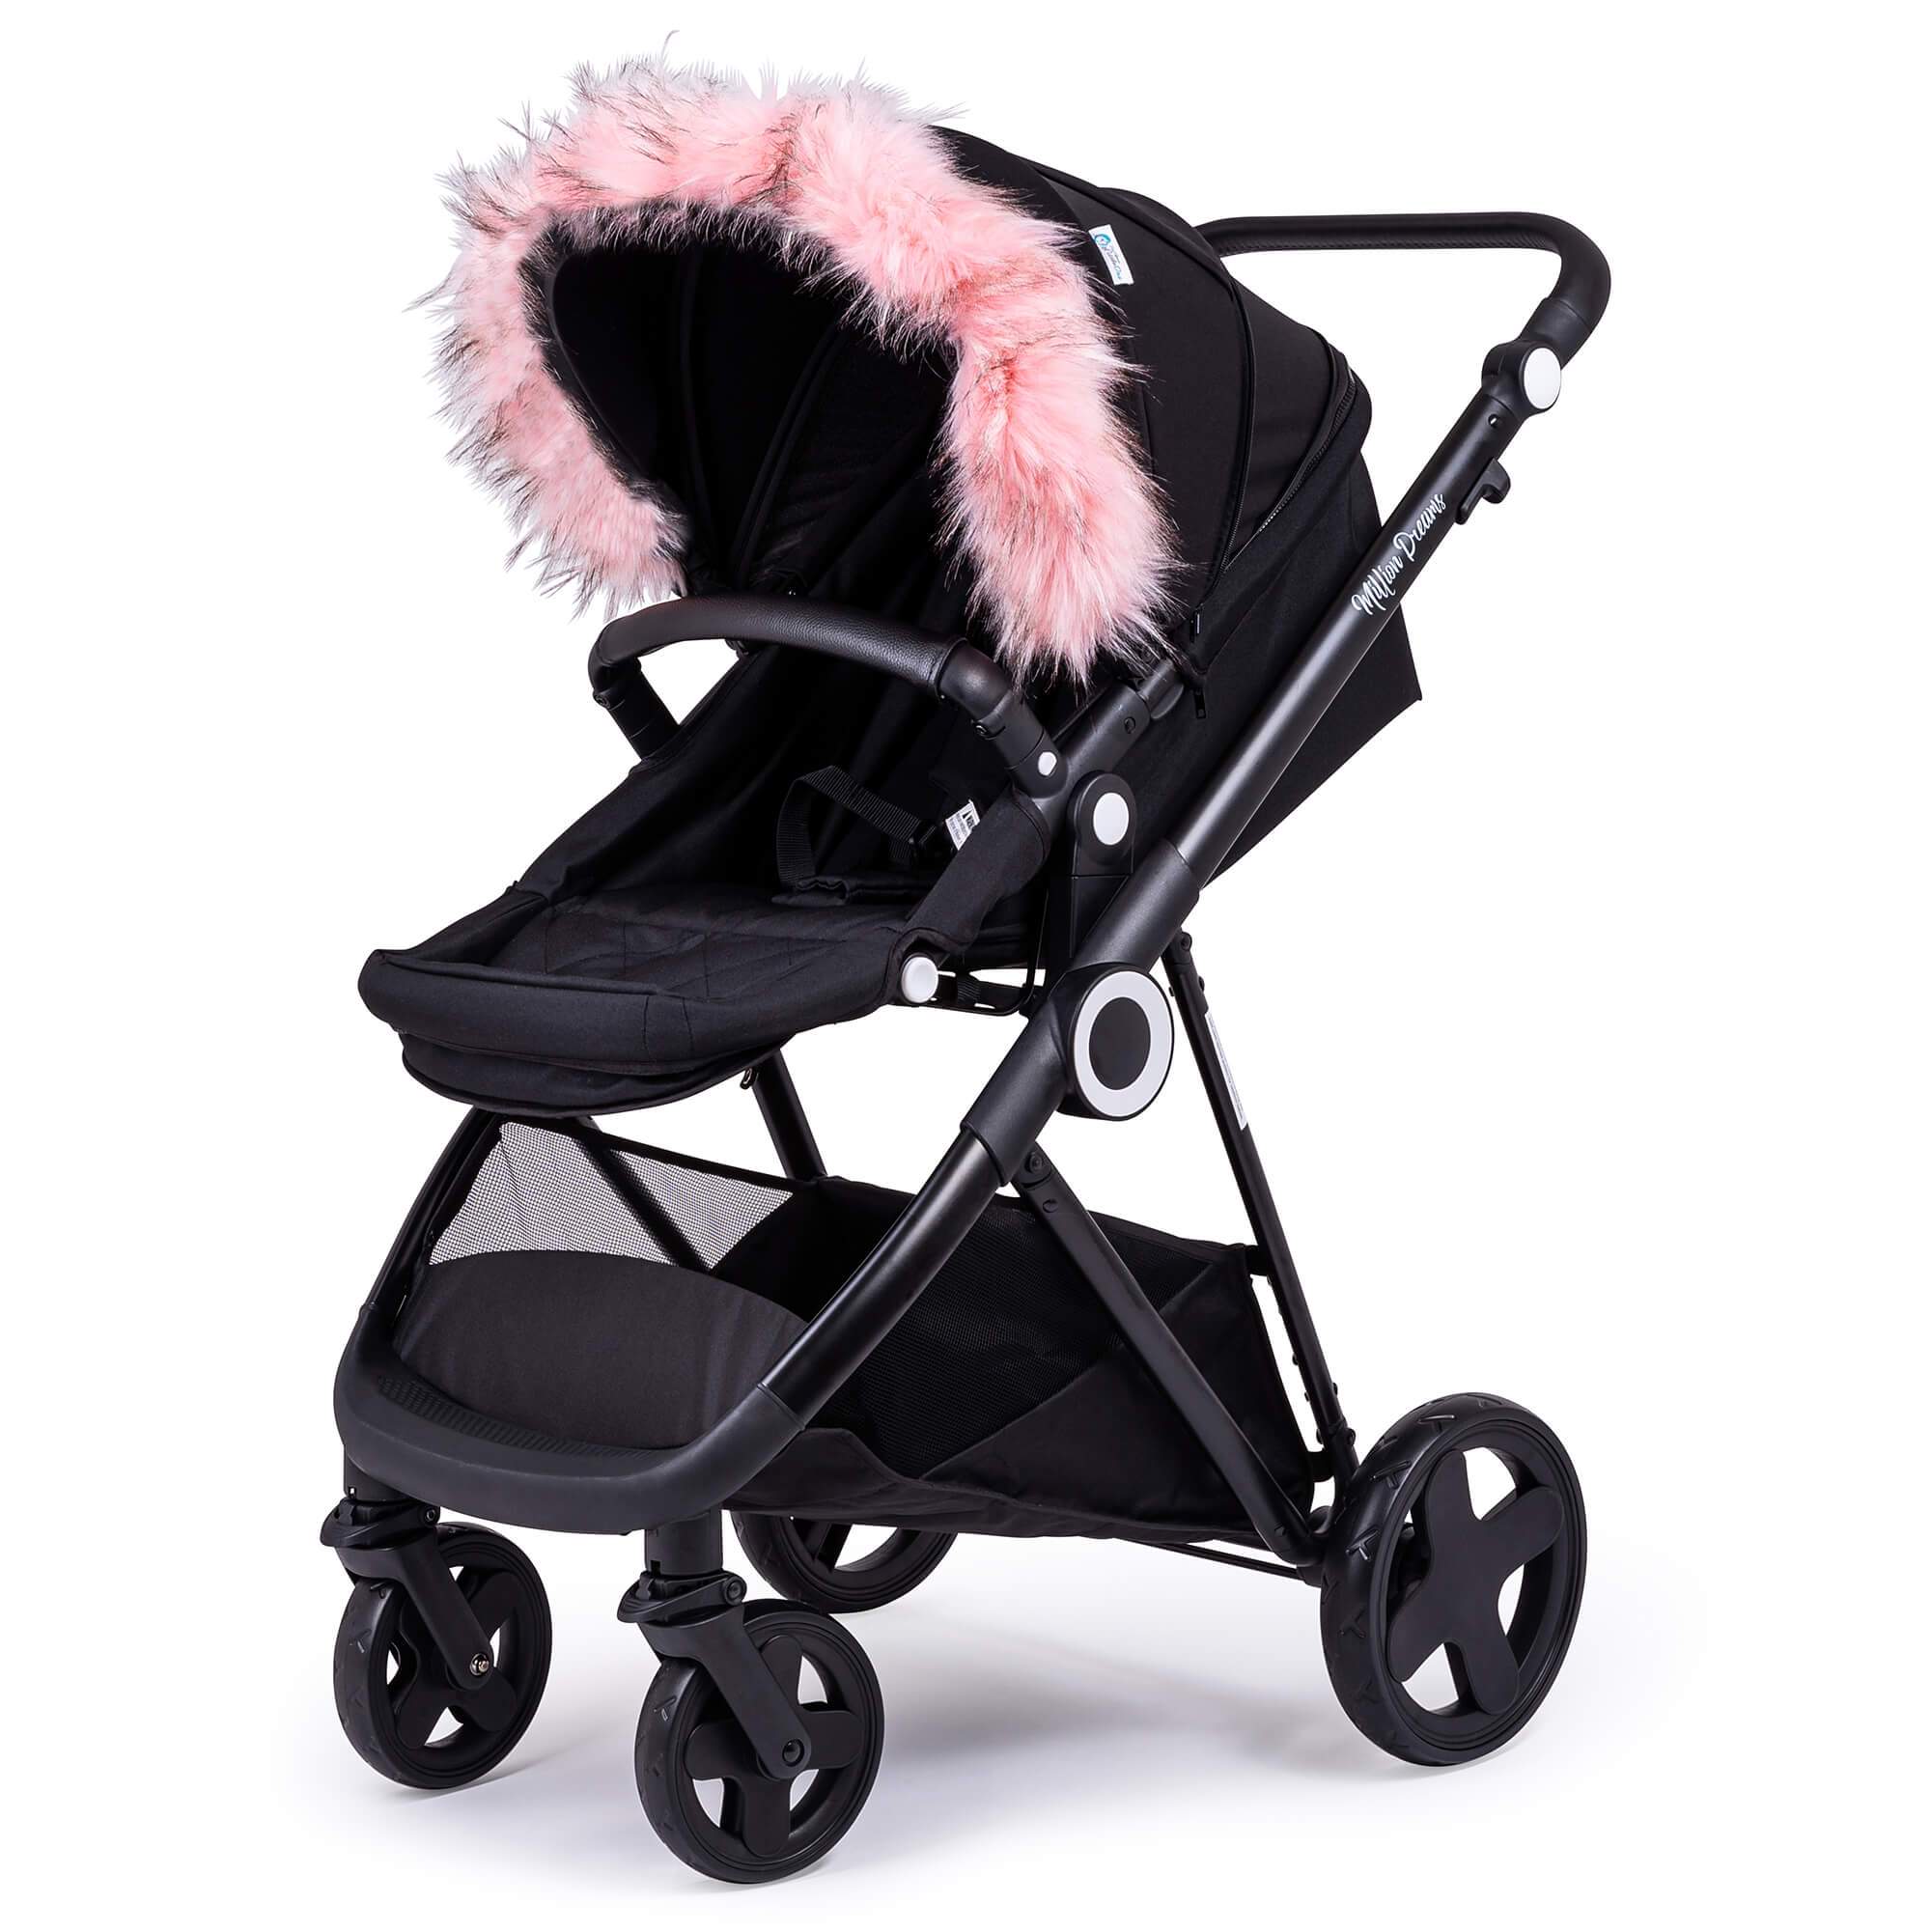 Pram Fur Hood Trim Attachment for Pushchair Compatible with iCandy - For Your Little One